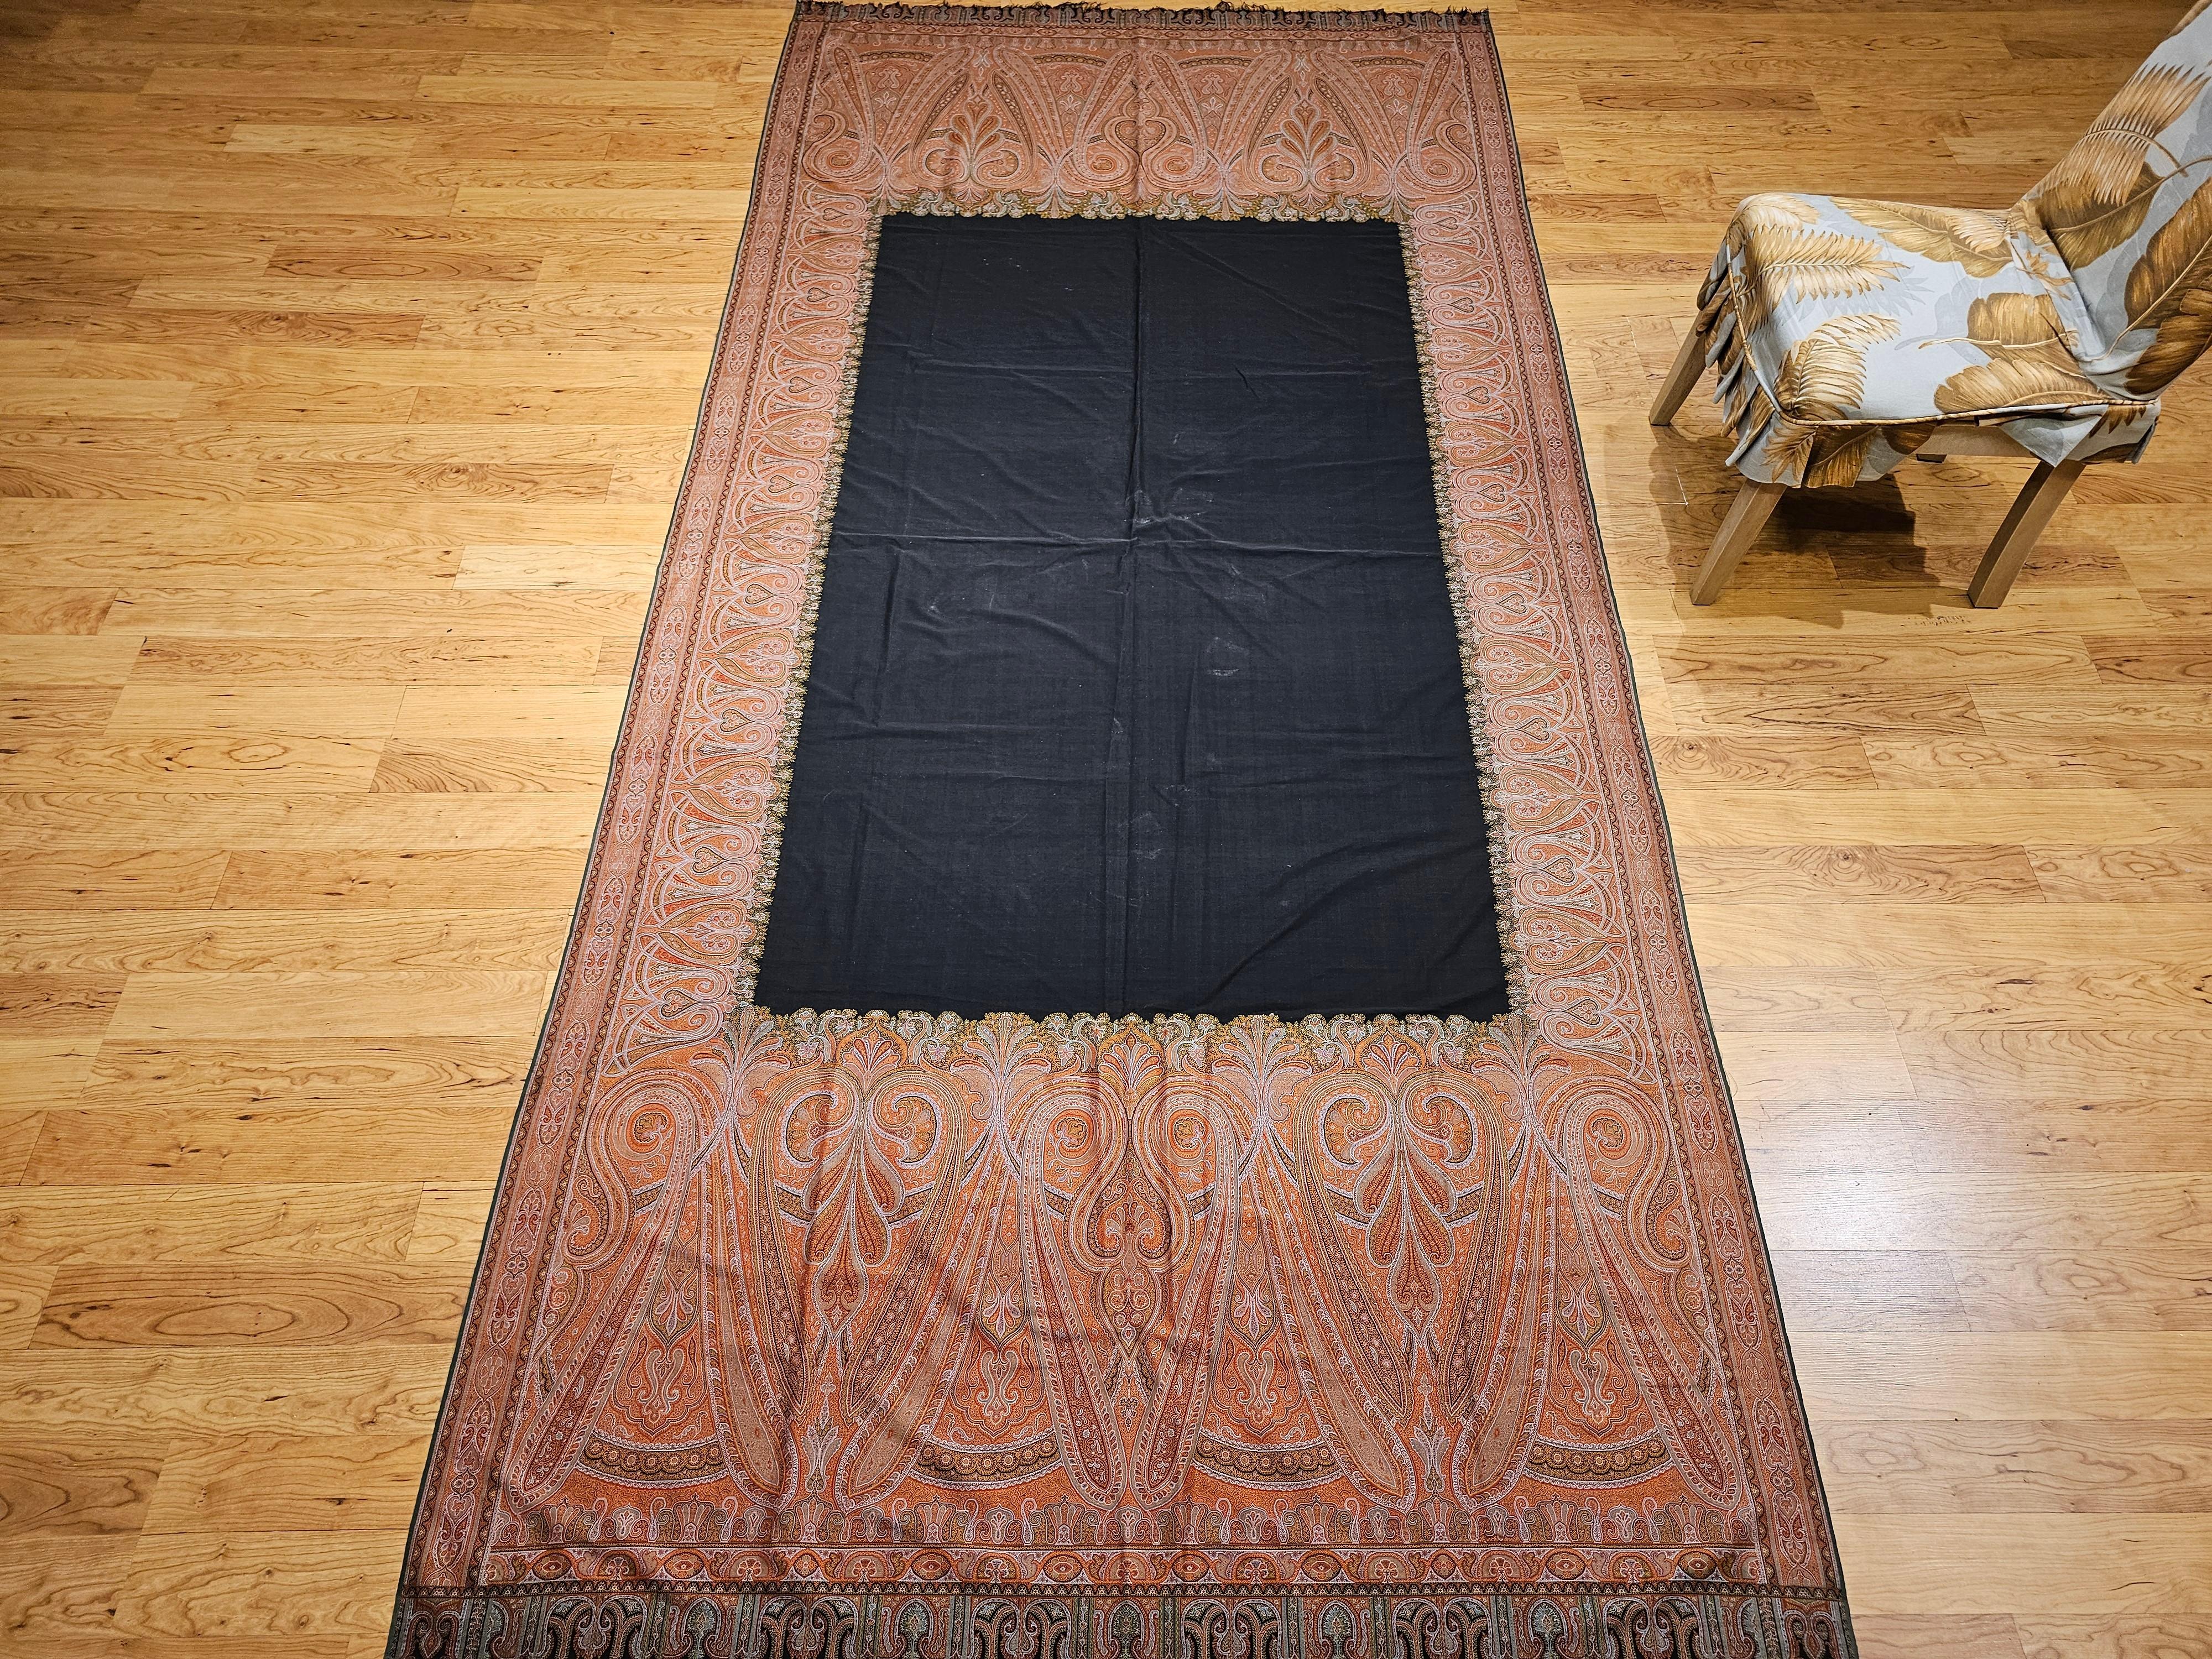 19th Century Hand-Woven Kashmiri Paisley Shawl in Brick Red, Black, Green For Sale 6